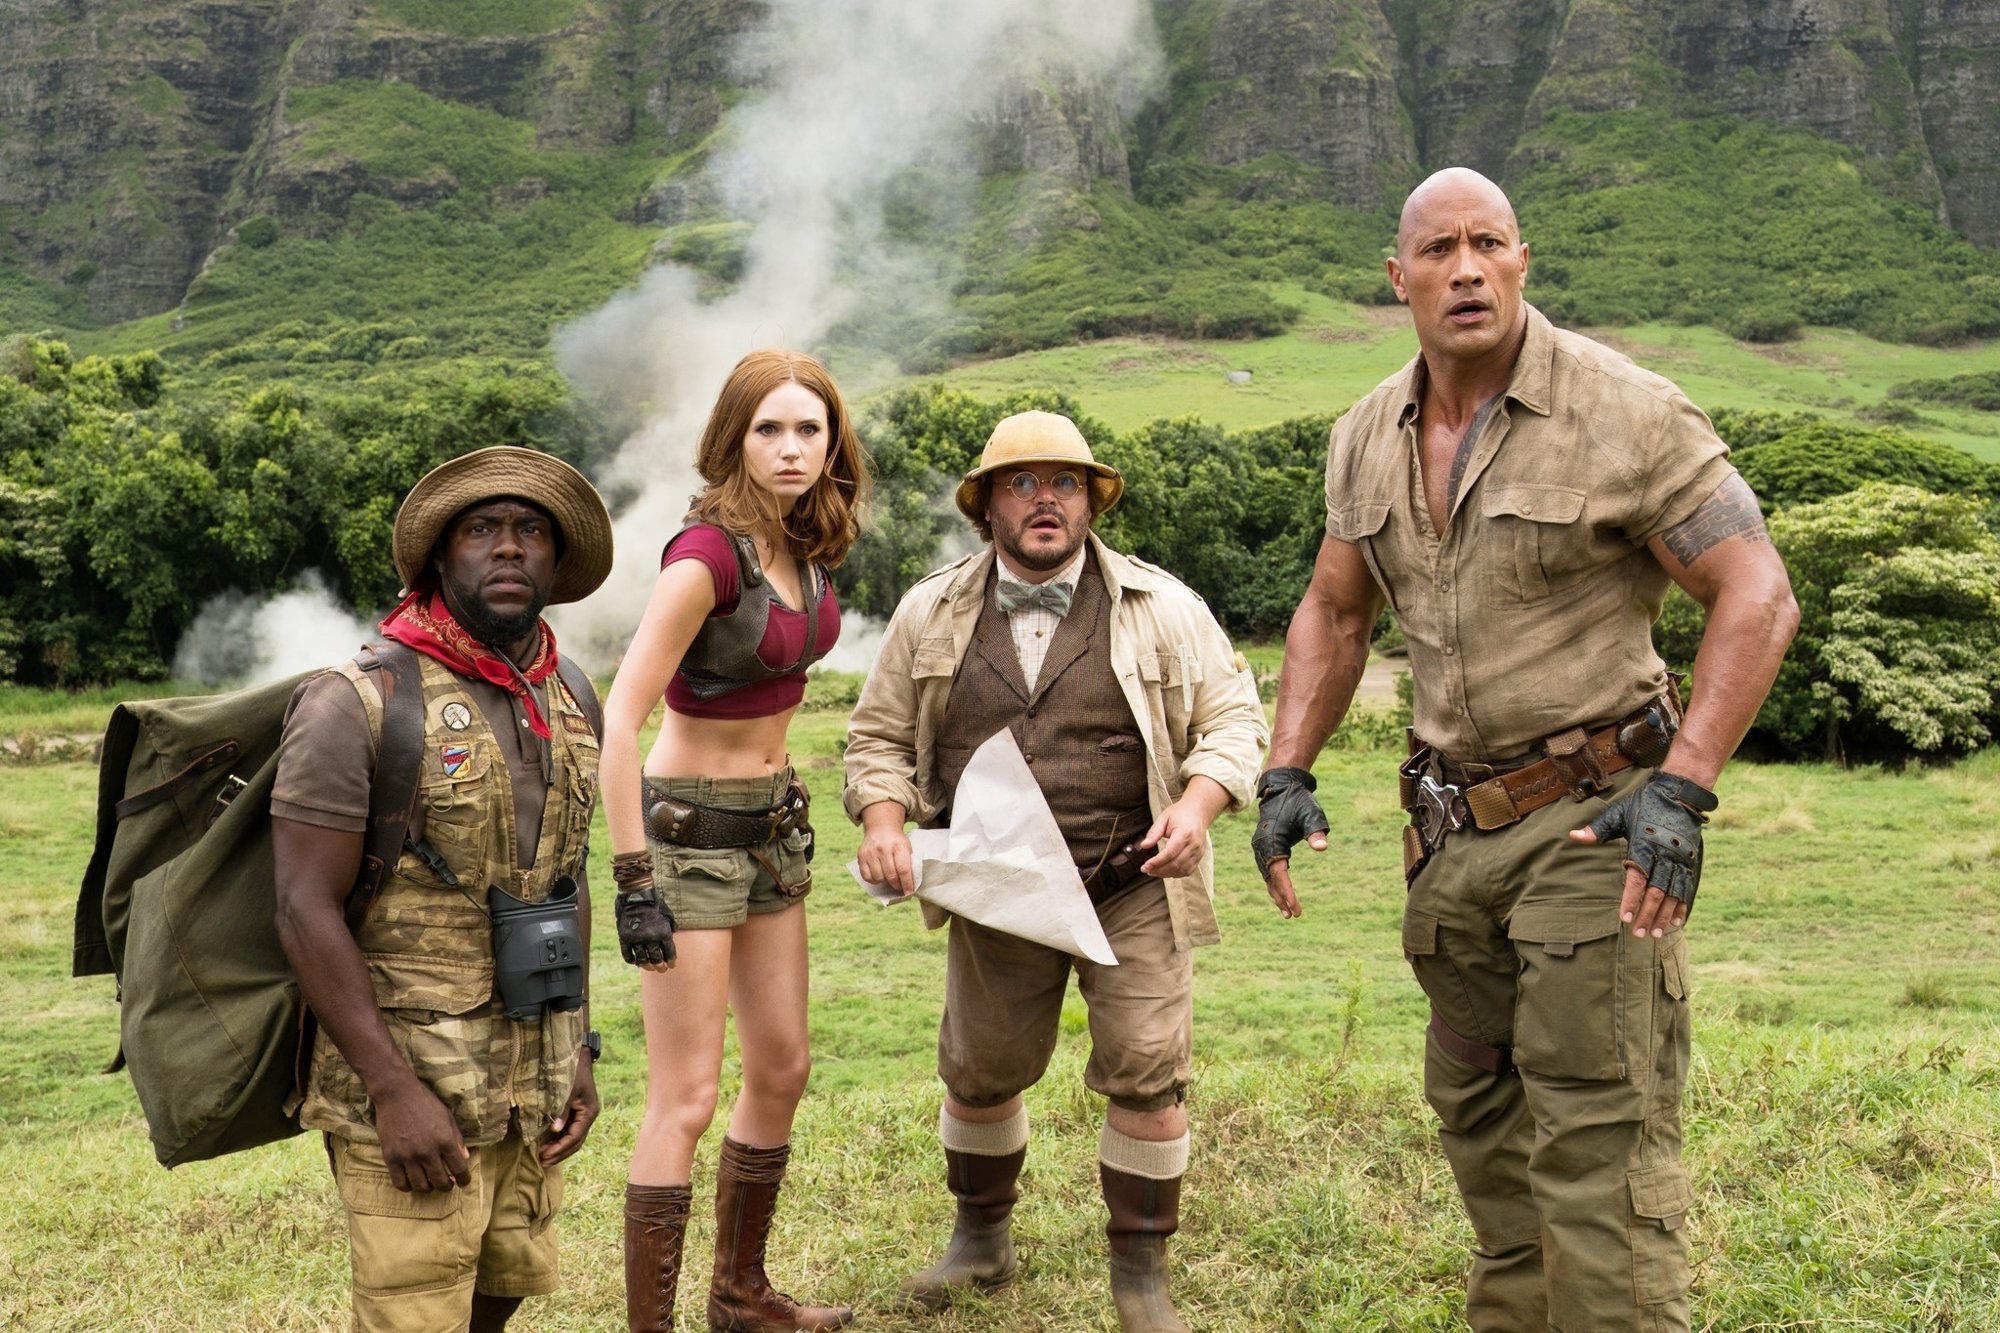 Kevin Hart, Karen Gillan, Jack Black and The Rock in Columbia Pictures' Jumanji: Welcome to the Jungle (2017)